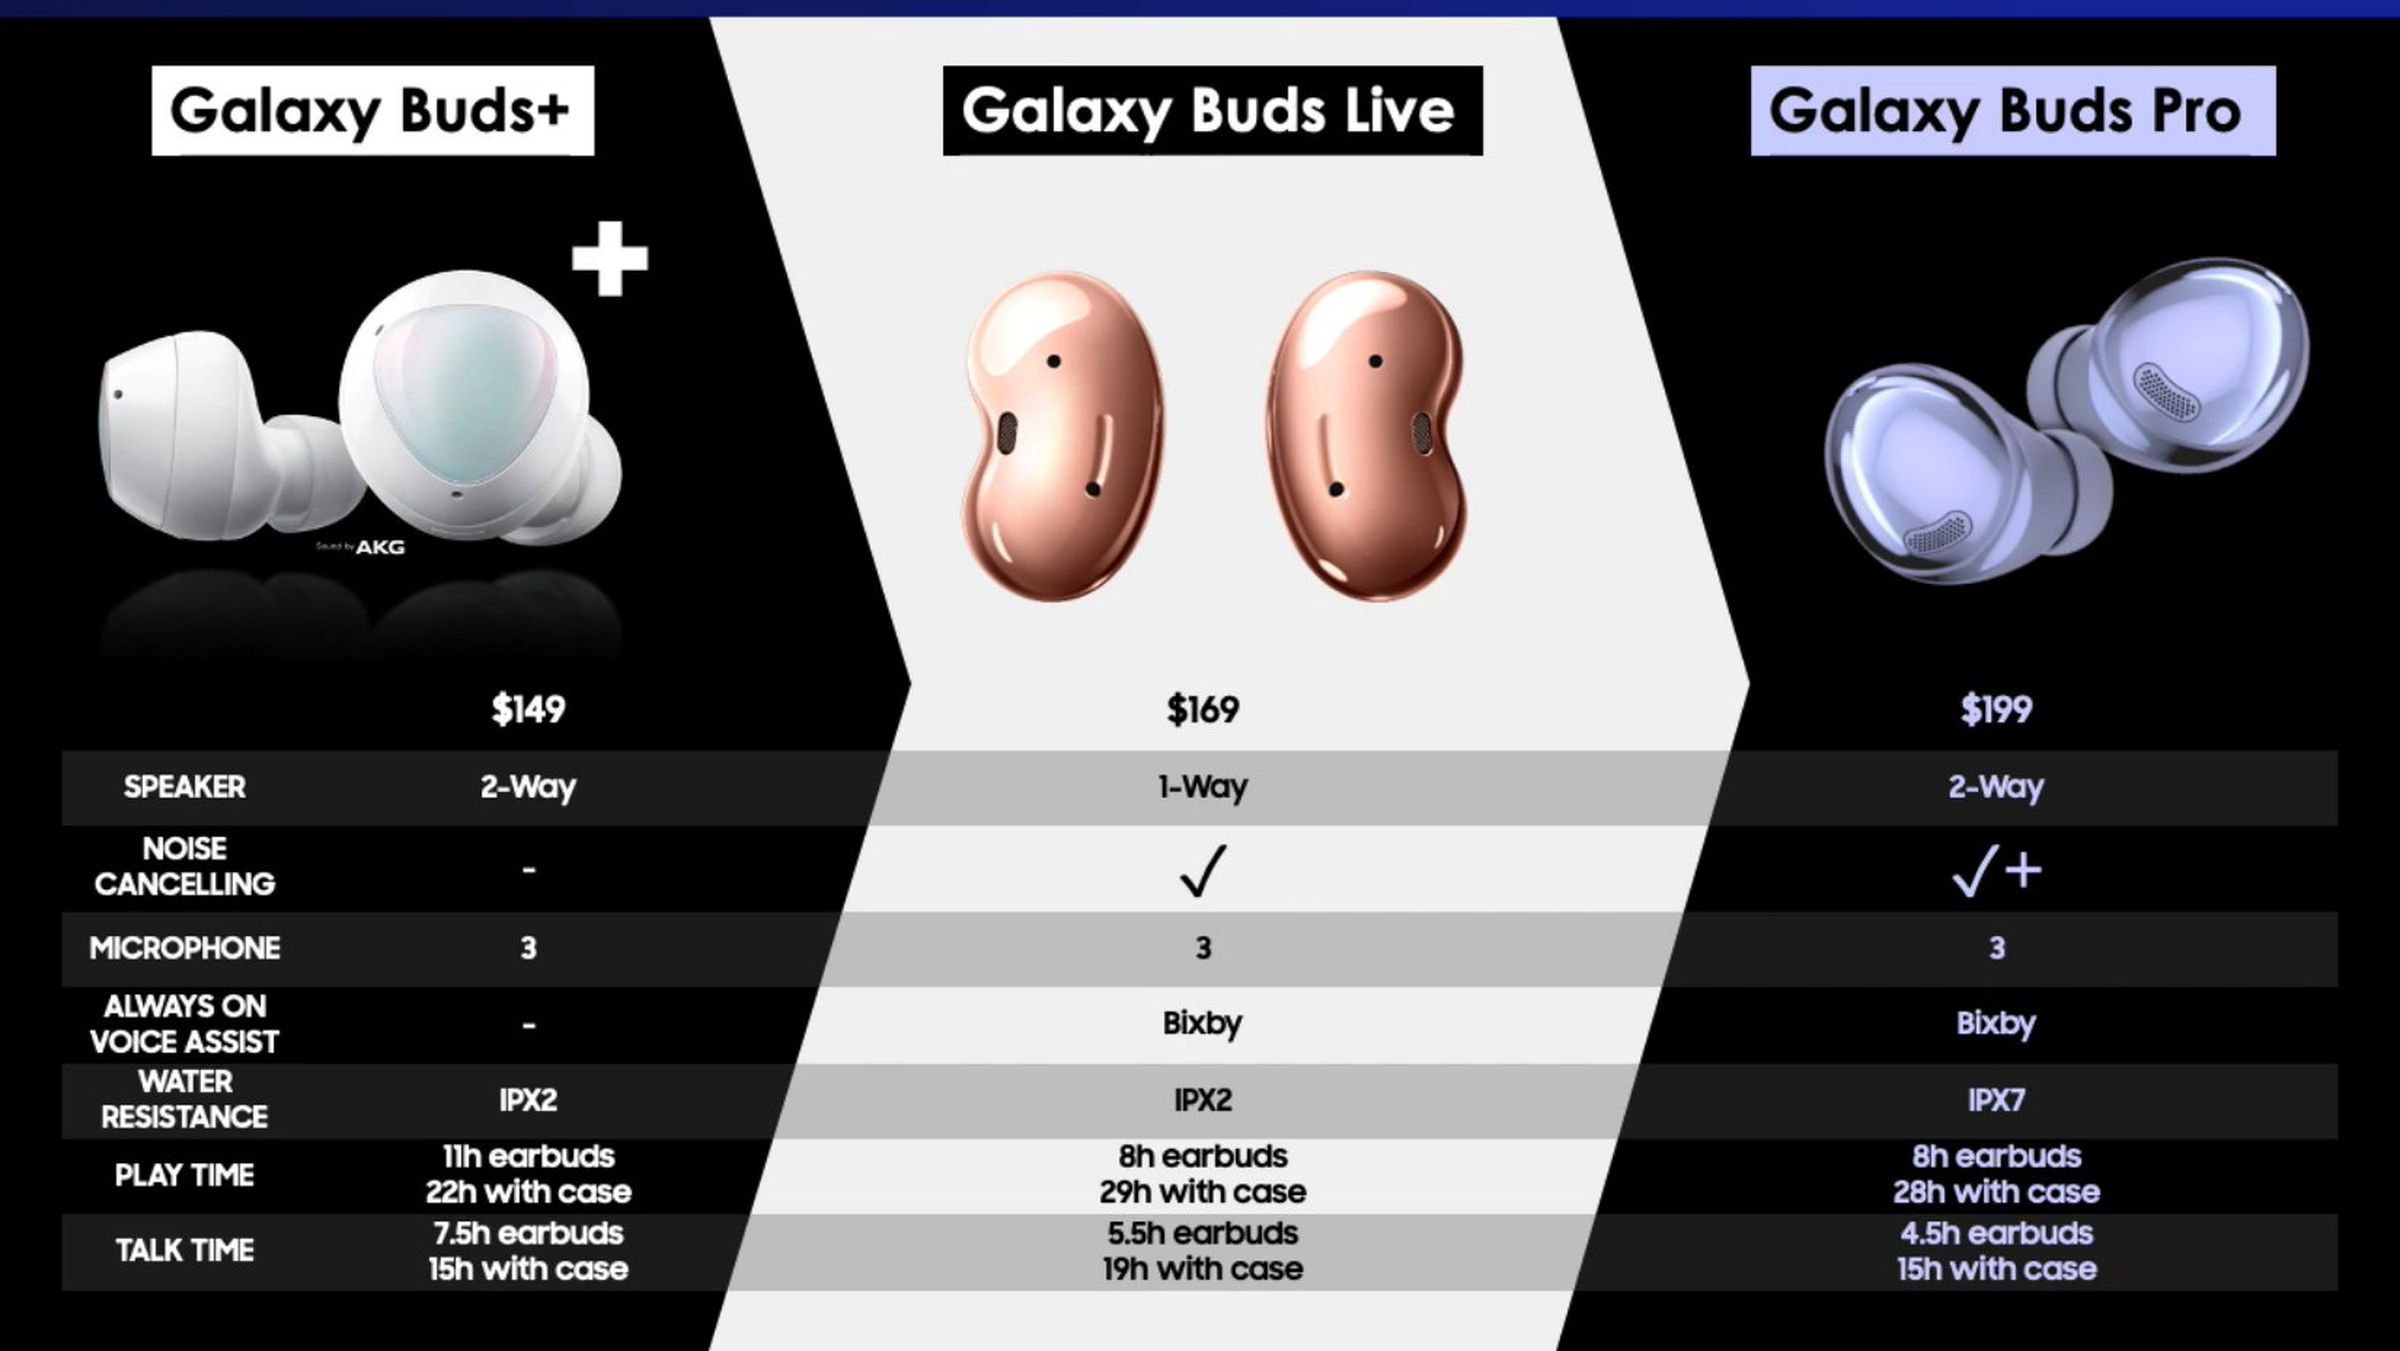 A spec sheet for the earbuds recently leaked, showing their specs in comparison to Samsung’s other buds.